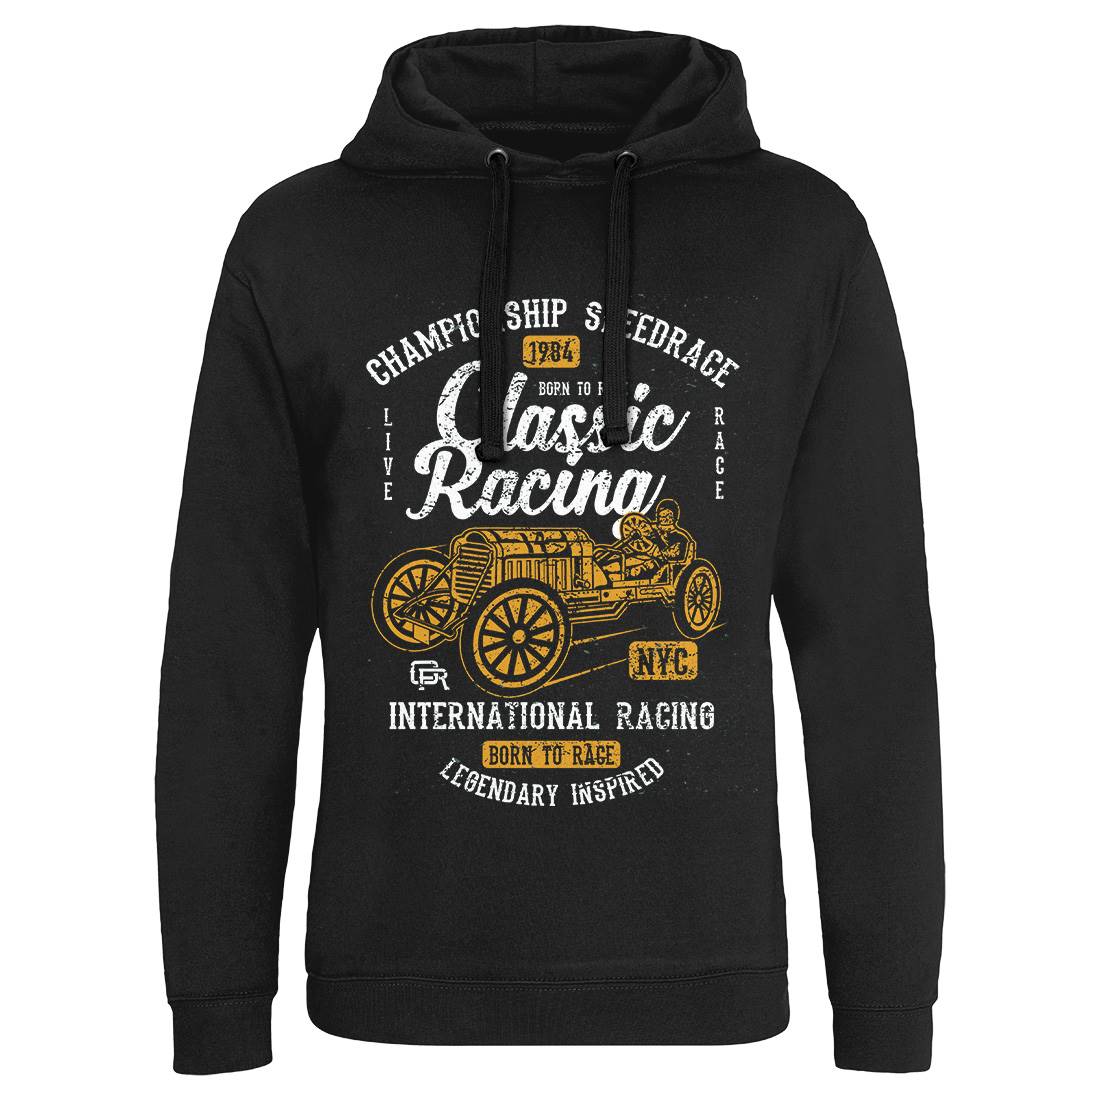 Classic Racing Mens Hoodie Without Pocket Cars A037